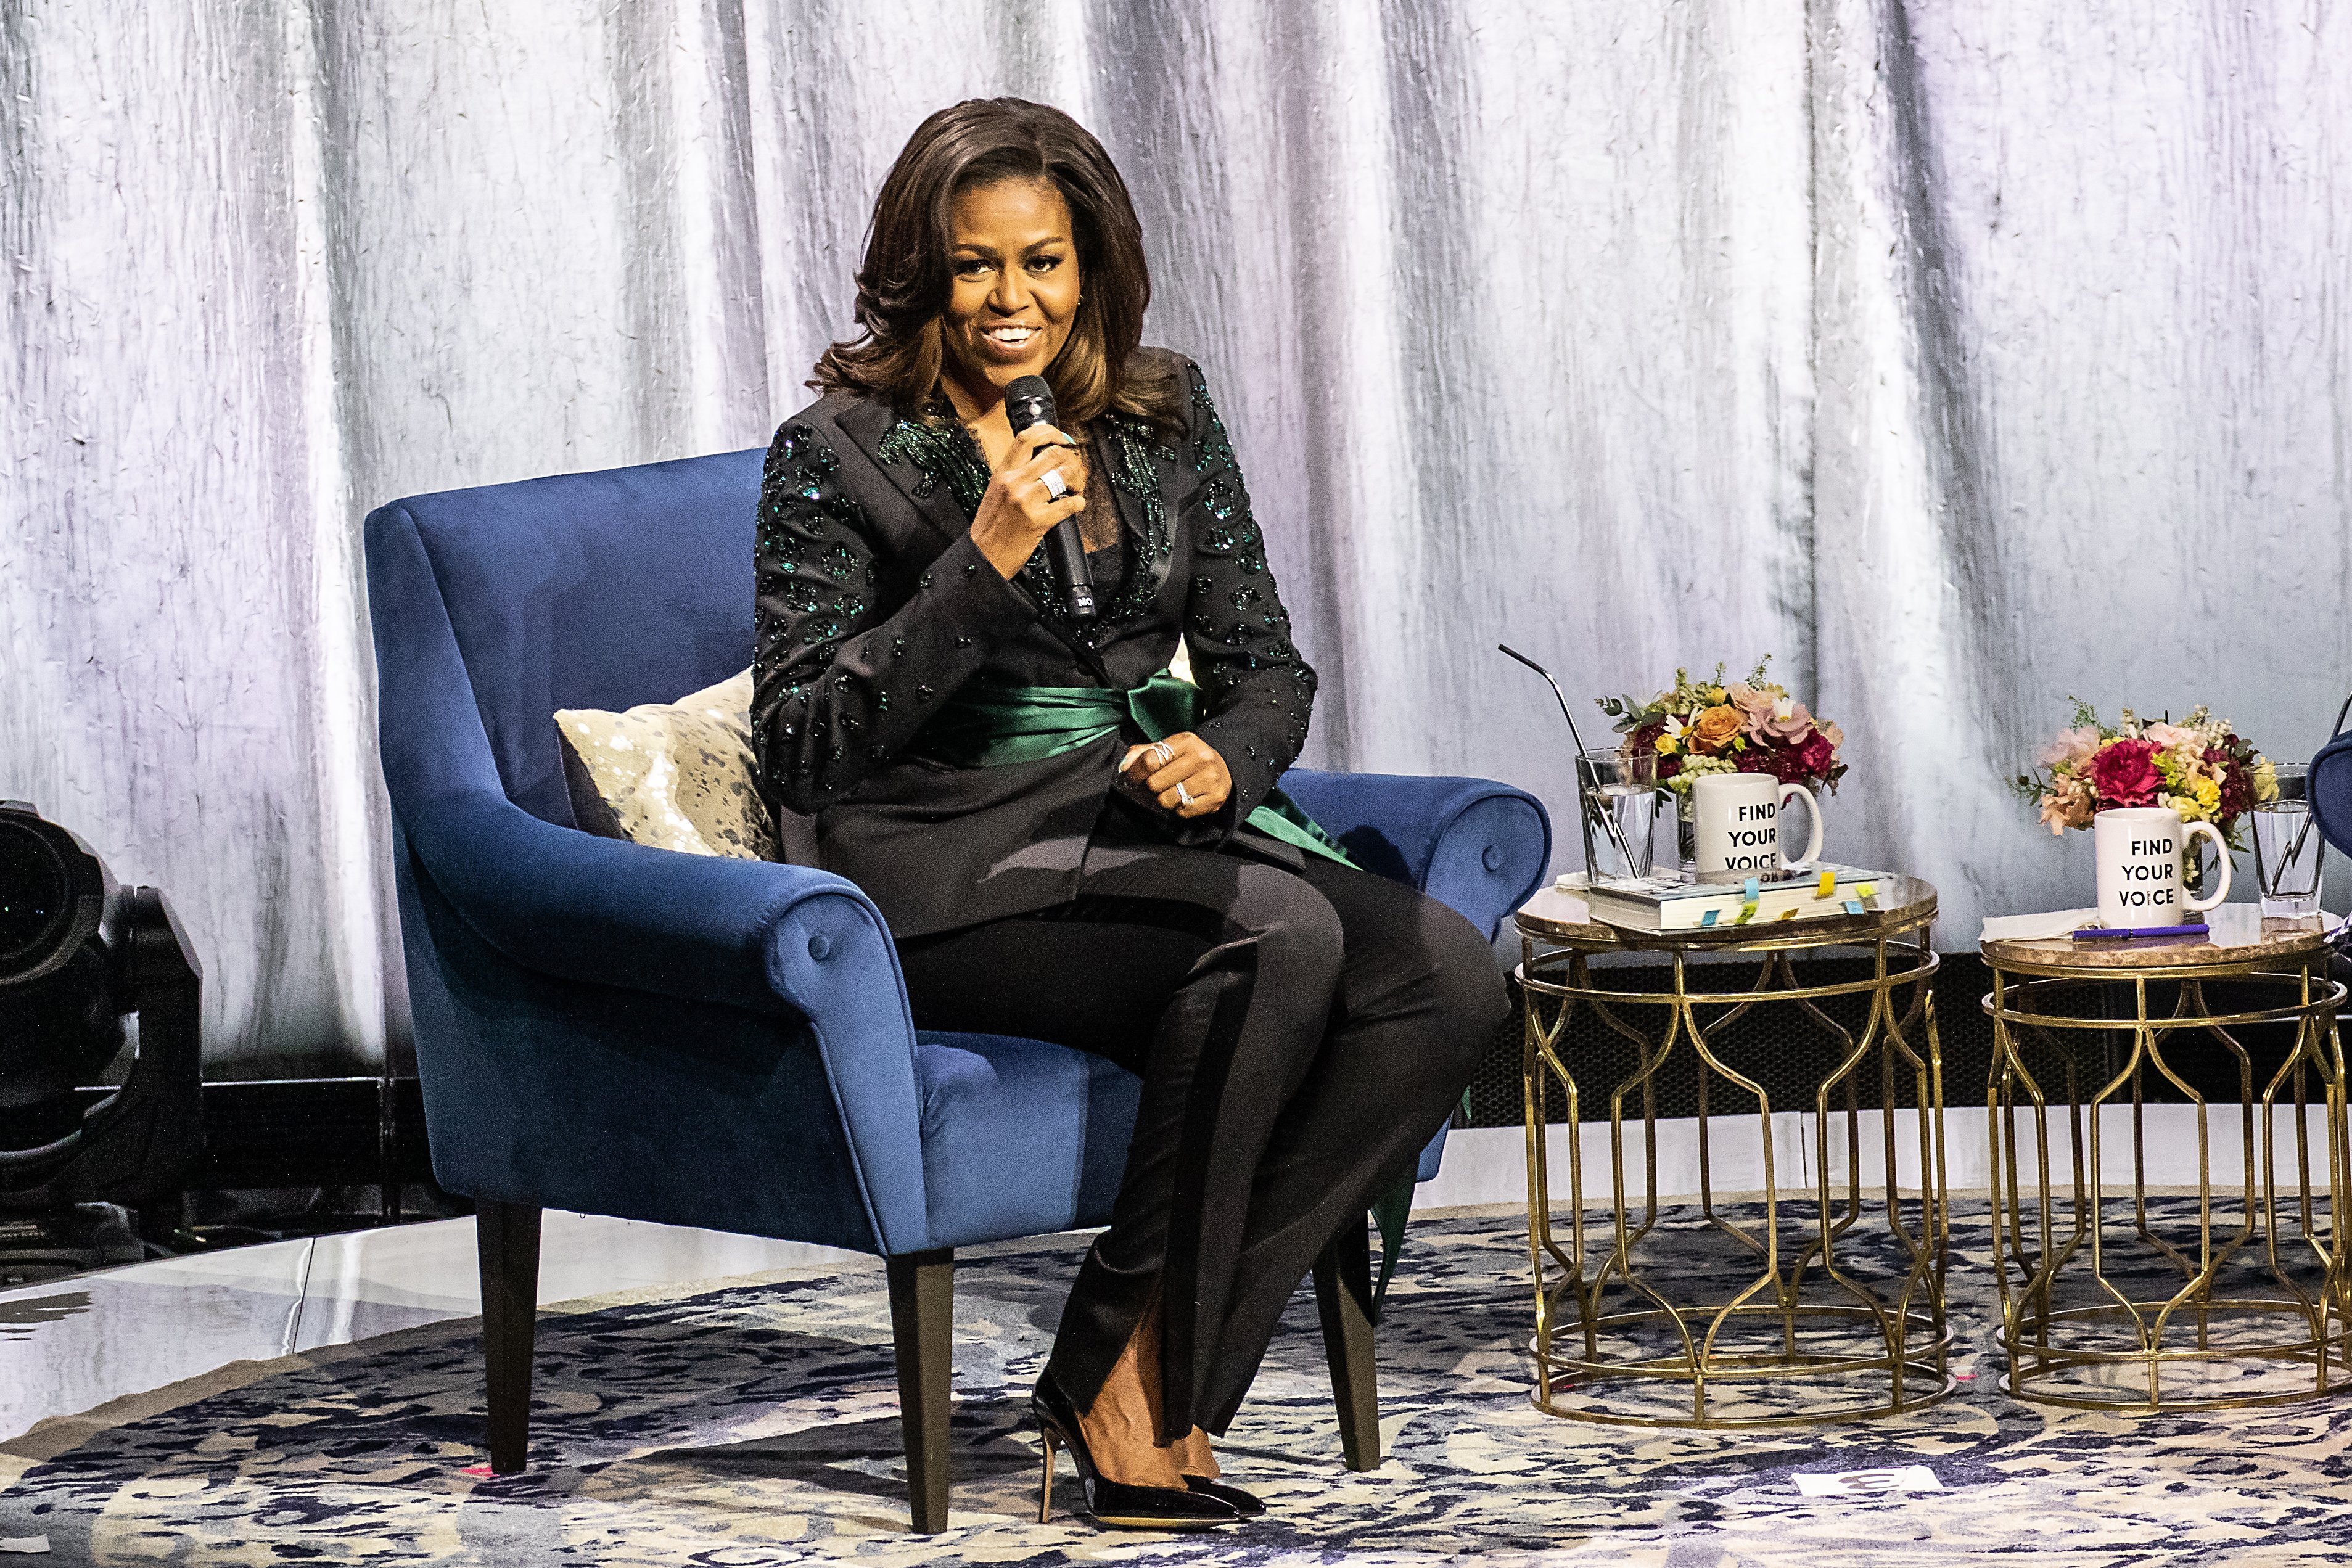 Michelle Obama held a conversation with Phoebe Robinson about her book "Becoming" at Oslo Spektrum on April 11, 2019. | Photo: Getty Images